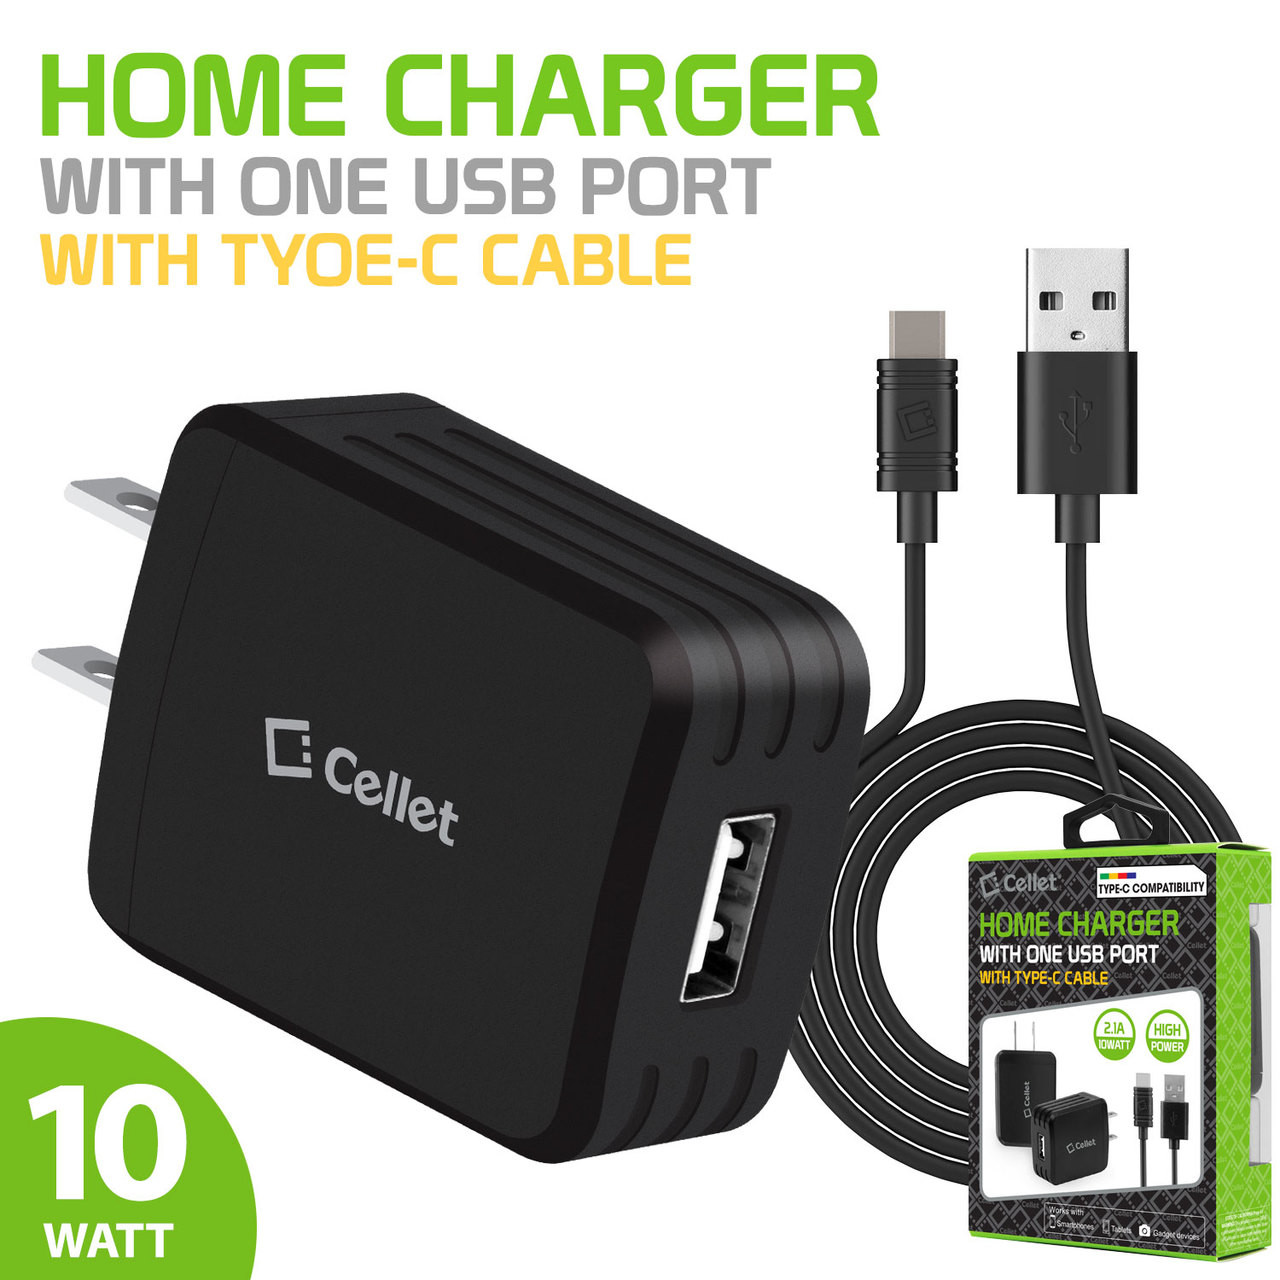 Wall/Travel Charger [Type -C] High Power USB Home Charger, CyonGear 2 ...